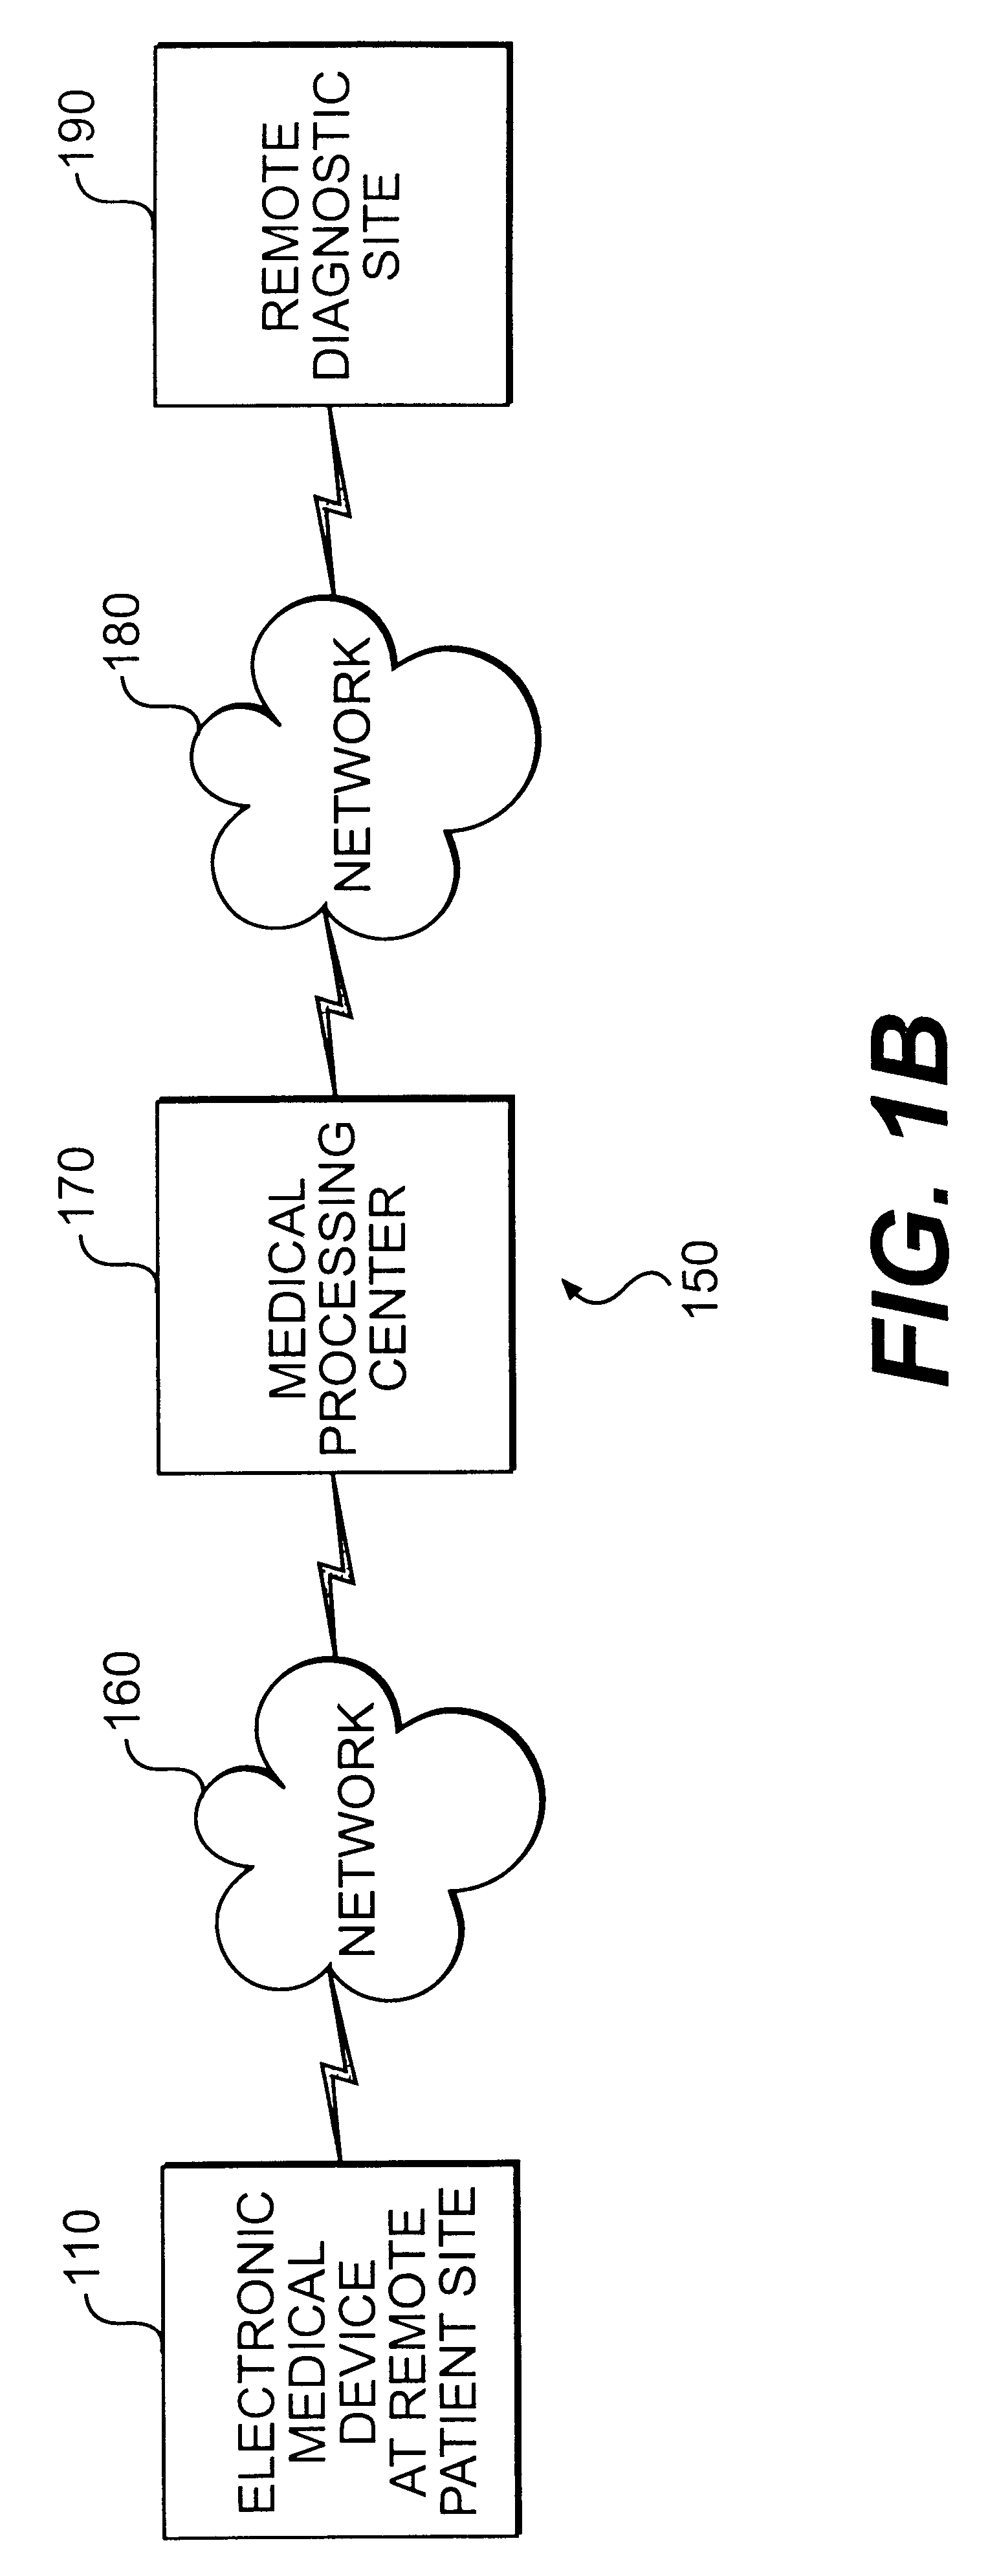 Methods and apparatus for processing, transmitting, and receiving data from a modular electronic medical device